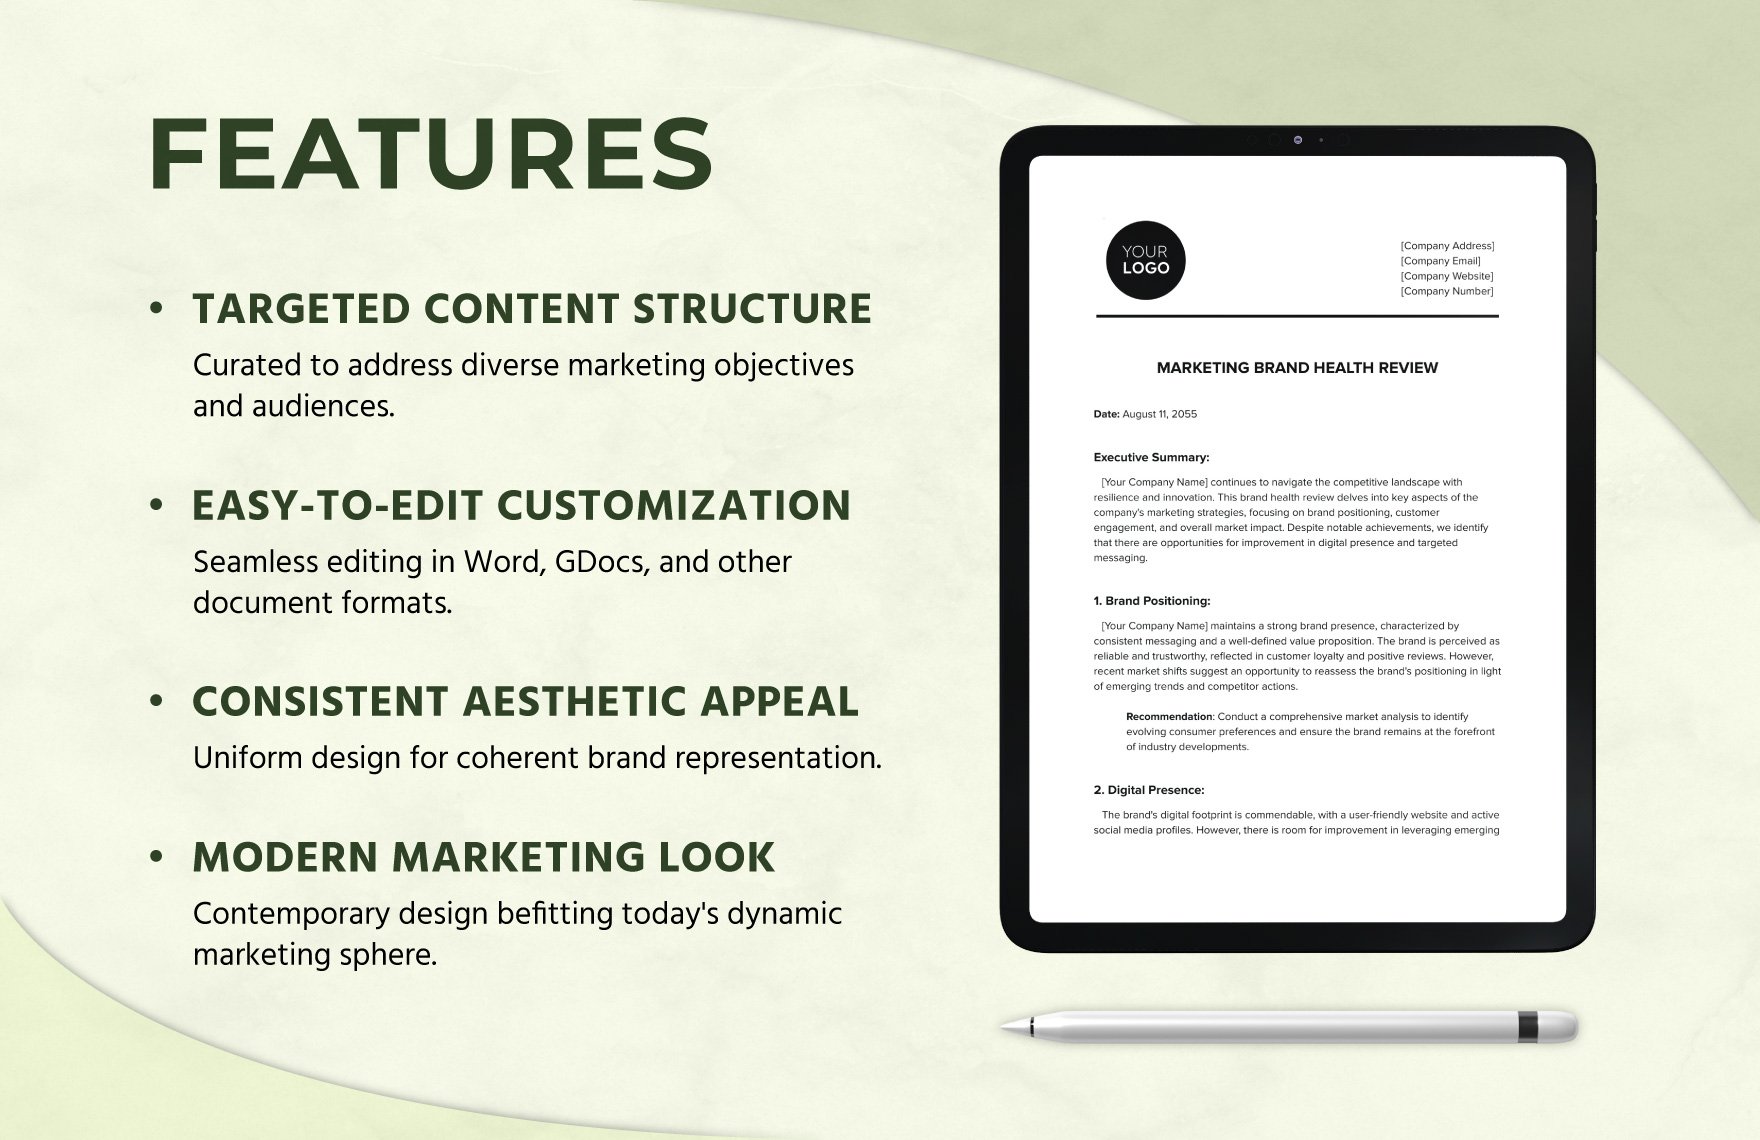 Marketing Brand Health Review Template